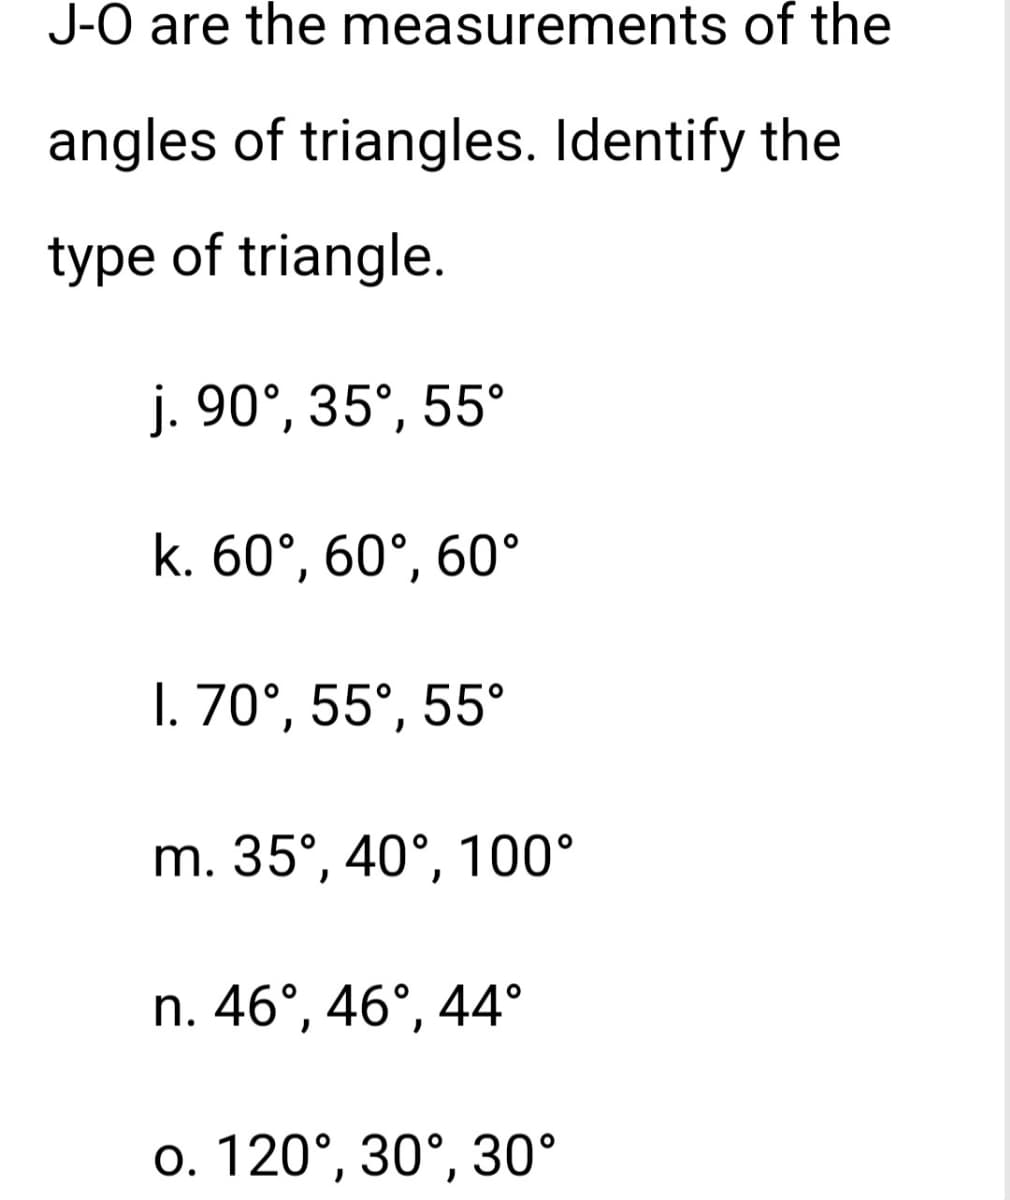 J-O are the measurements of the
angles of triangles. Identify the
type of triangle.
j. 90°, 35°, 55°
k. 60°, 60°, 60°
I. 70°, 55°, 55°
m. 35°, 40°, 100°
n. 46°, 46°, 44°
o. 120°, 30°, 30°